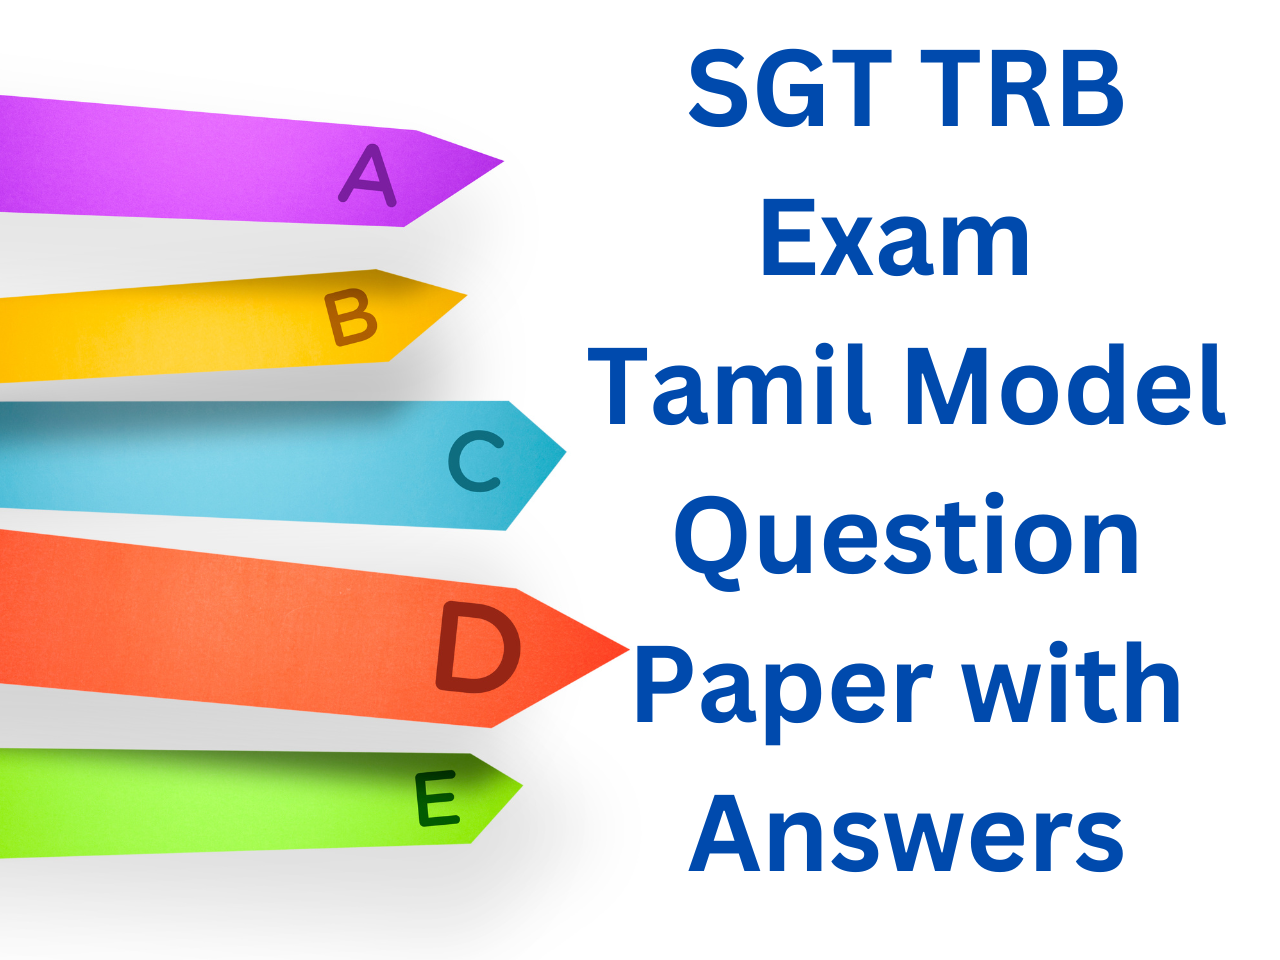 sgt trb exam tamil model question paper with answers